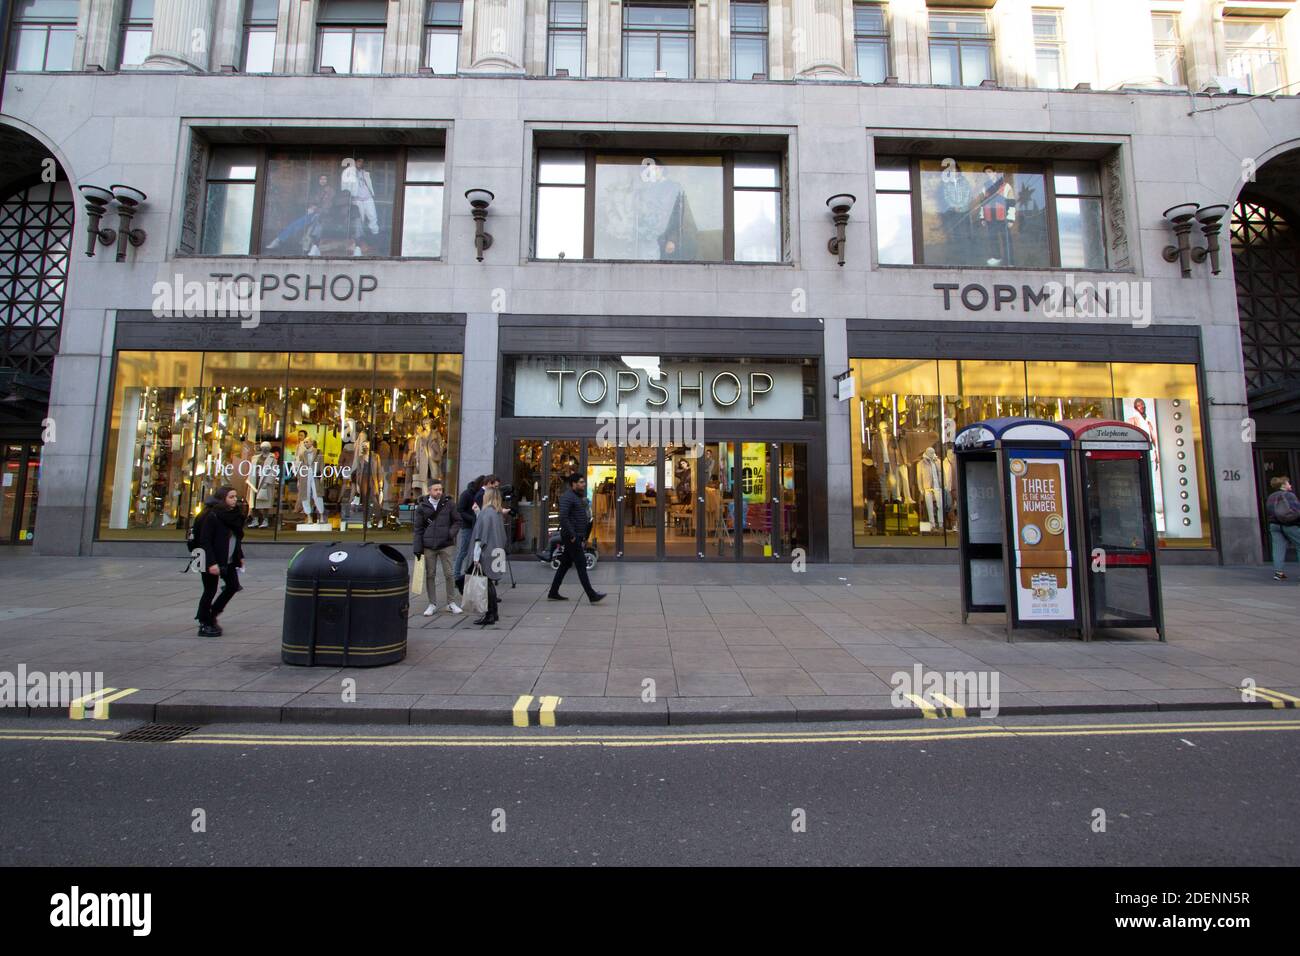 Arcadia group in administration   Topshop and Topman on  empty Oxford Street London shopping street during covid crisis as Arcadia group goes into administration Stock Photo